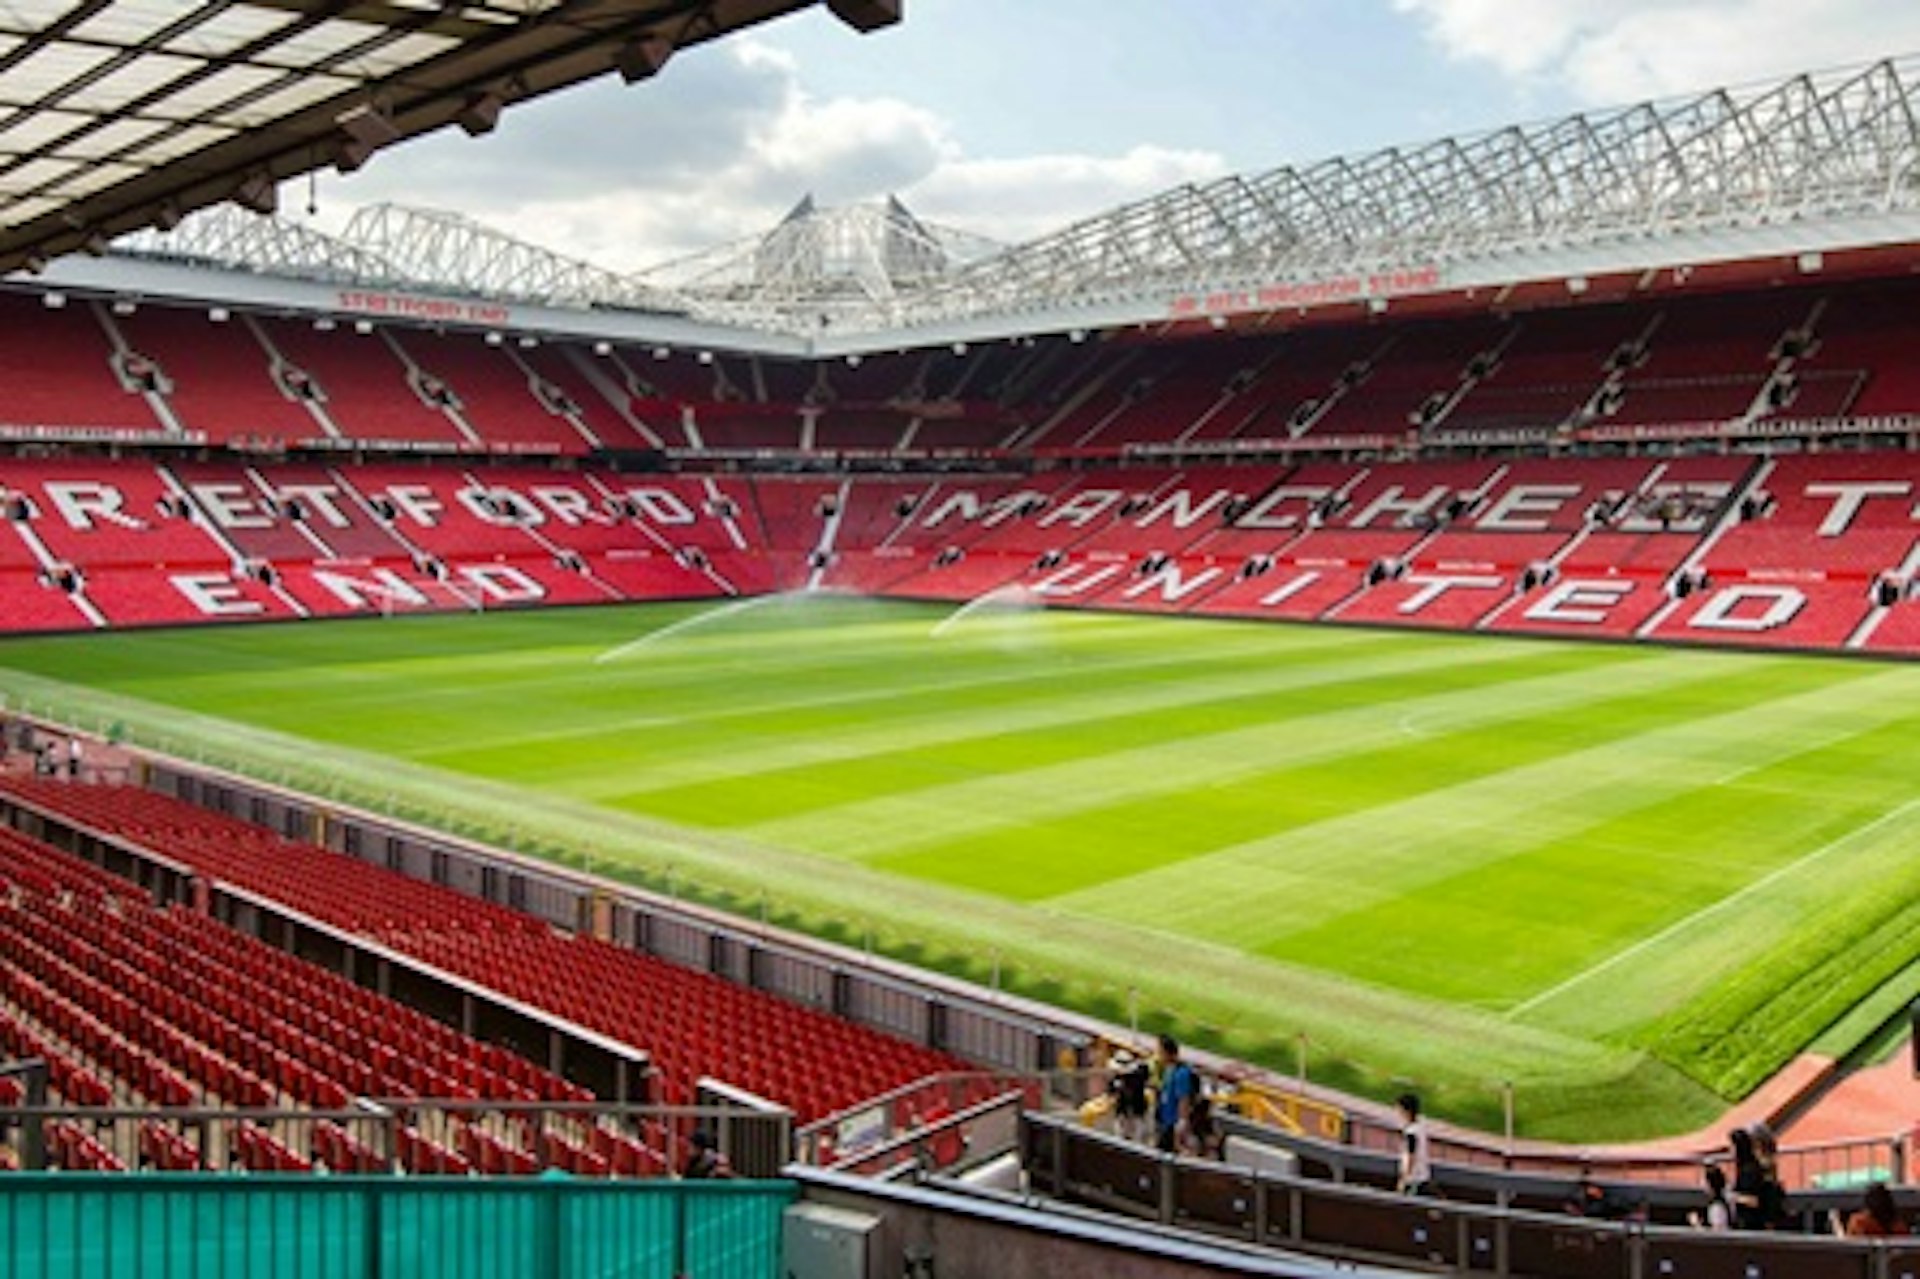 Manchester United Football Club Stadium Tour and Leisure Cruise for One Adult and One Child 2